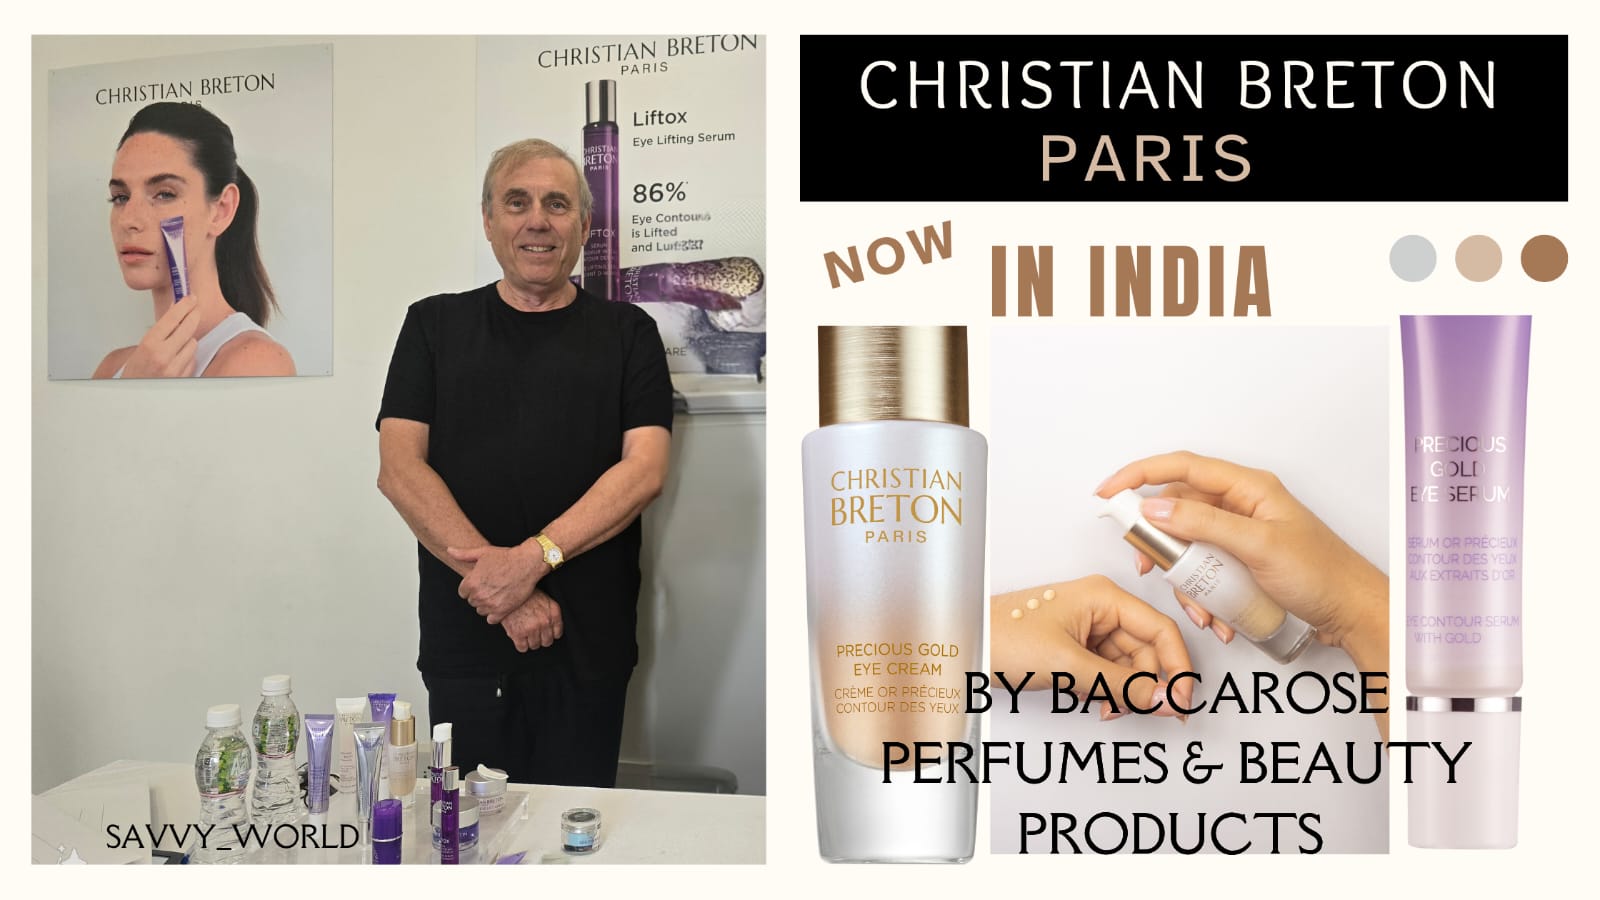 French Luxury Skincare Brand ‘Christian Breton’ partners with Baccarose for launch in India